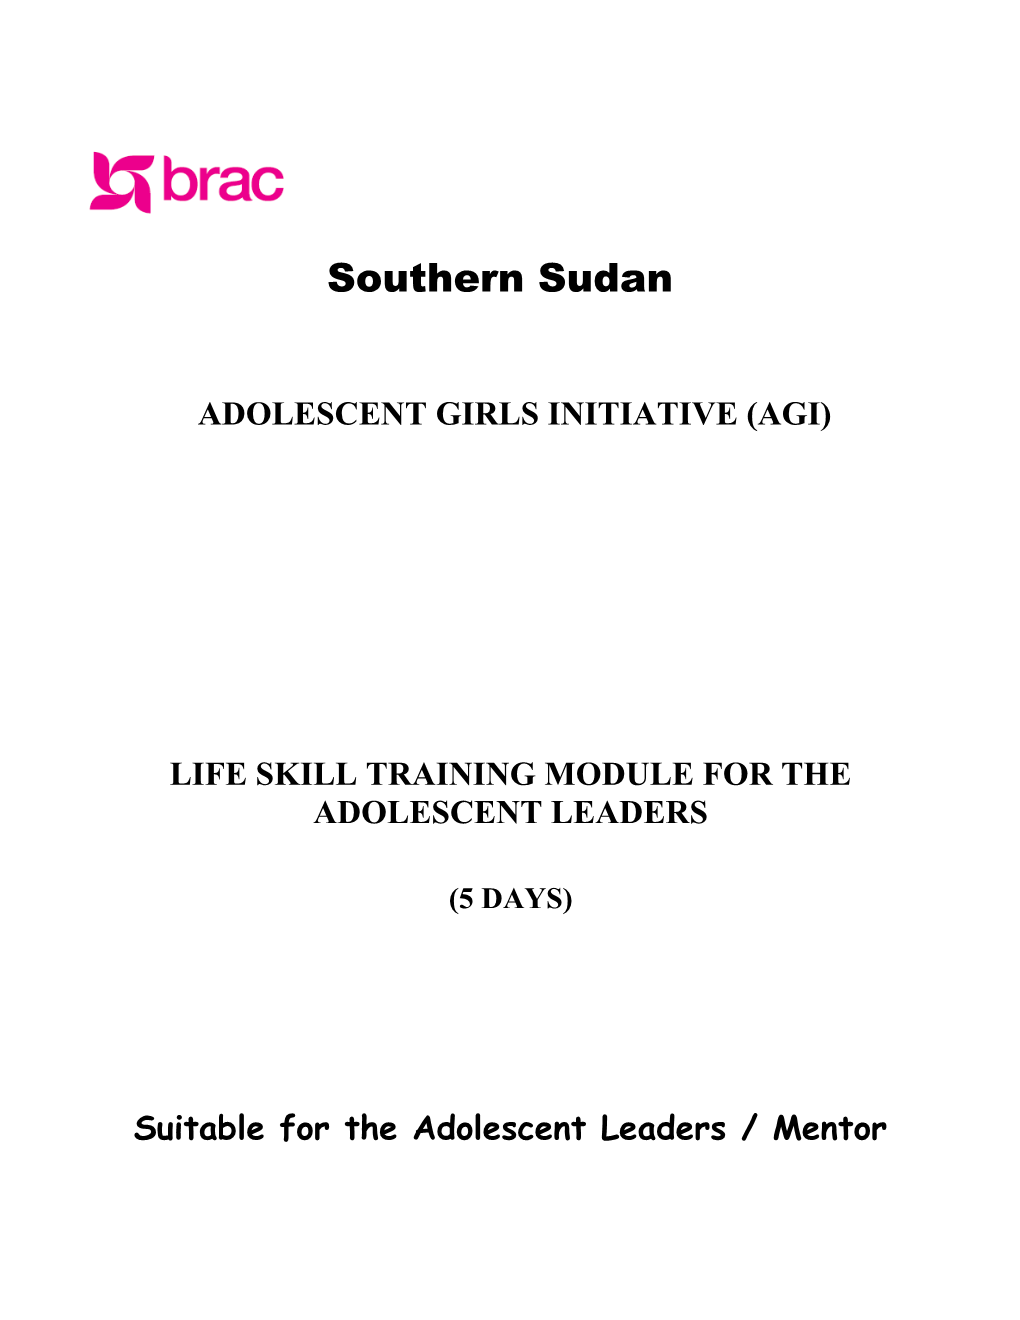 Life Skill Training Module for the Adolescent Leaders